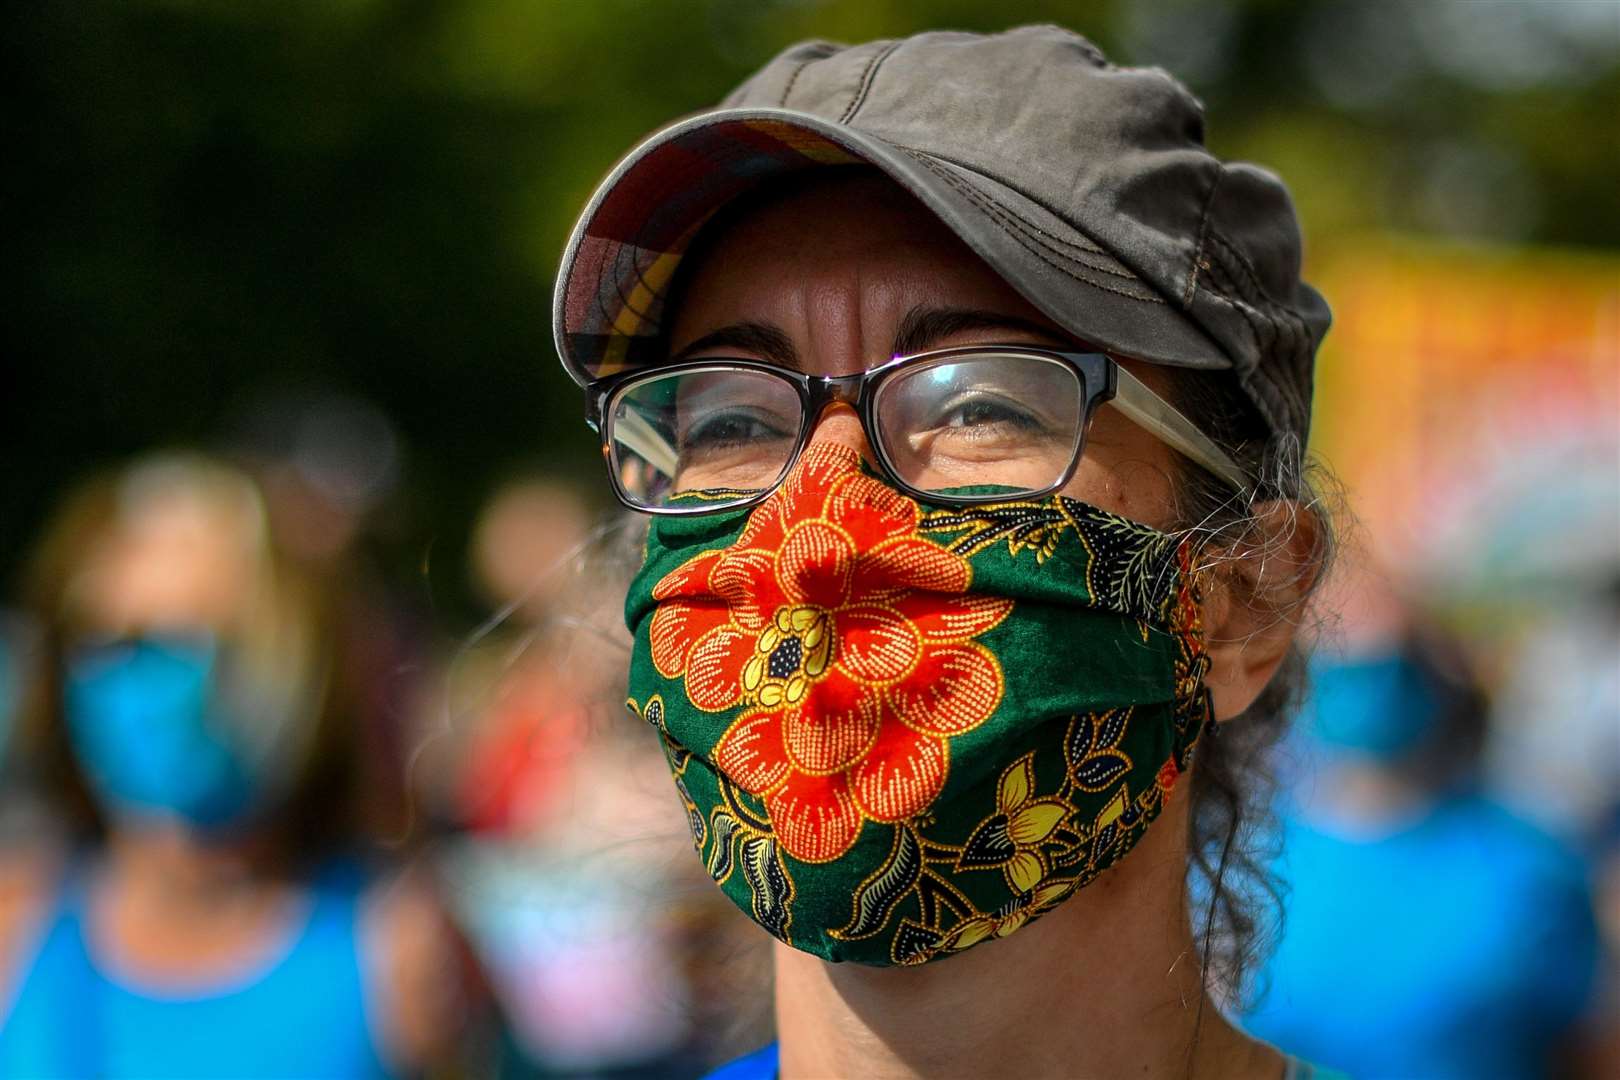 Face coverings are now regularly worn across the UK (Ben Birchall/PA)